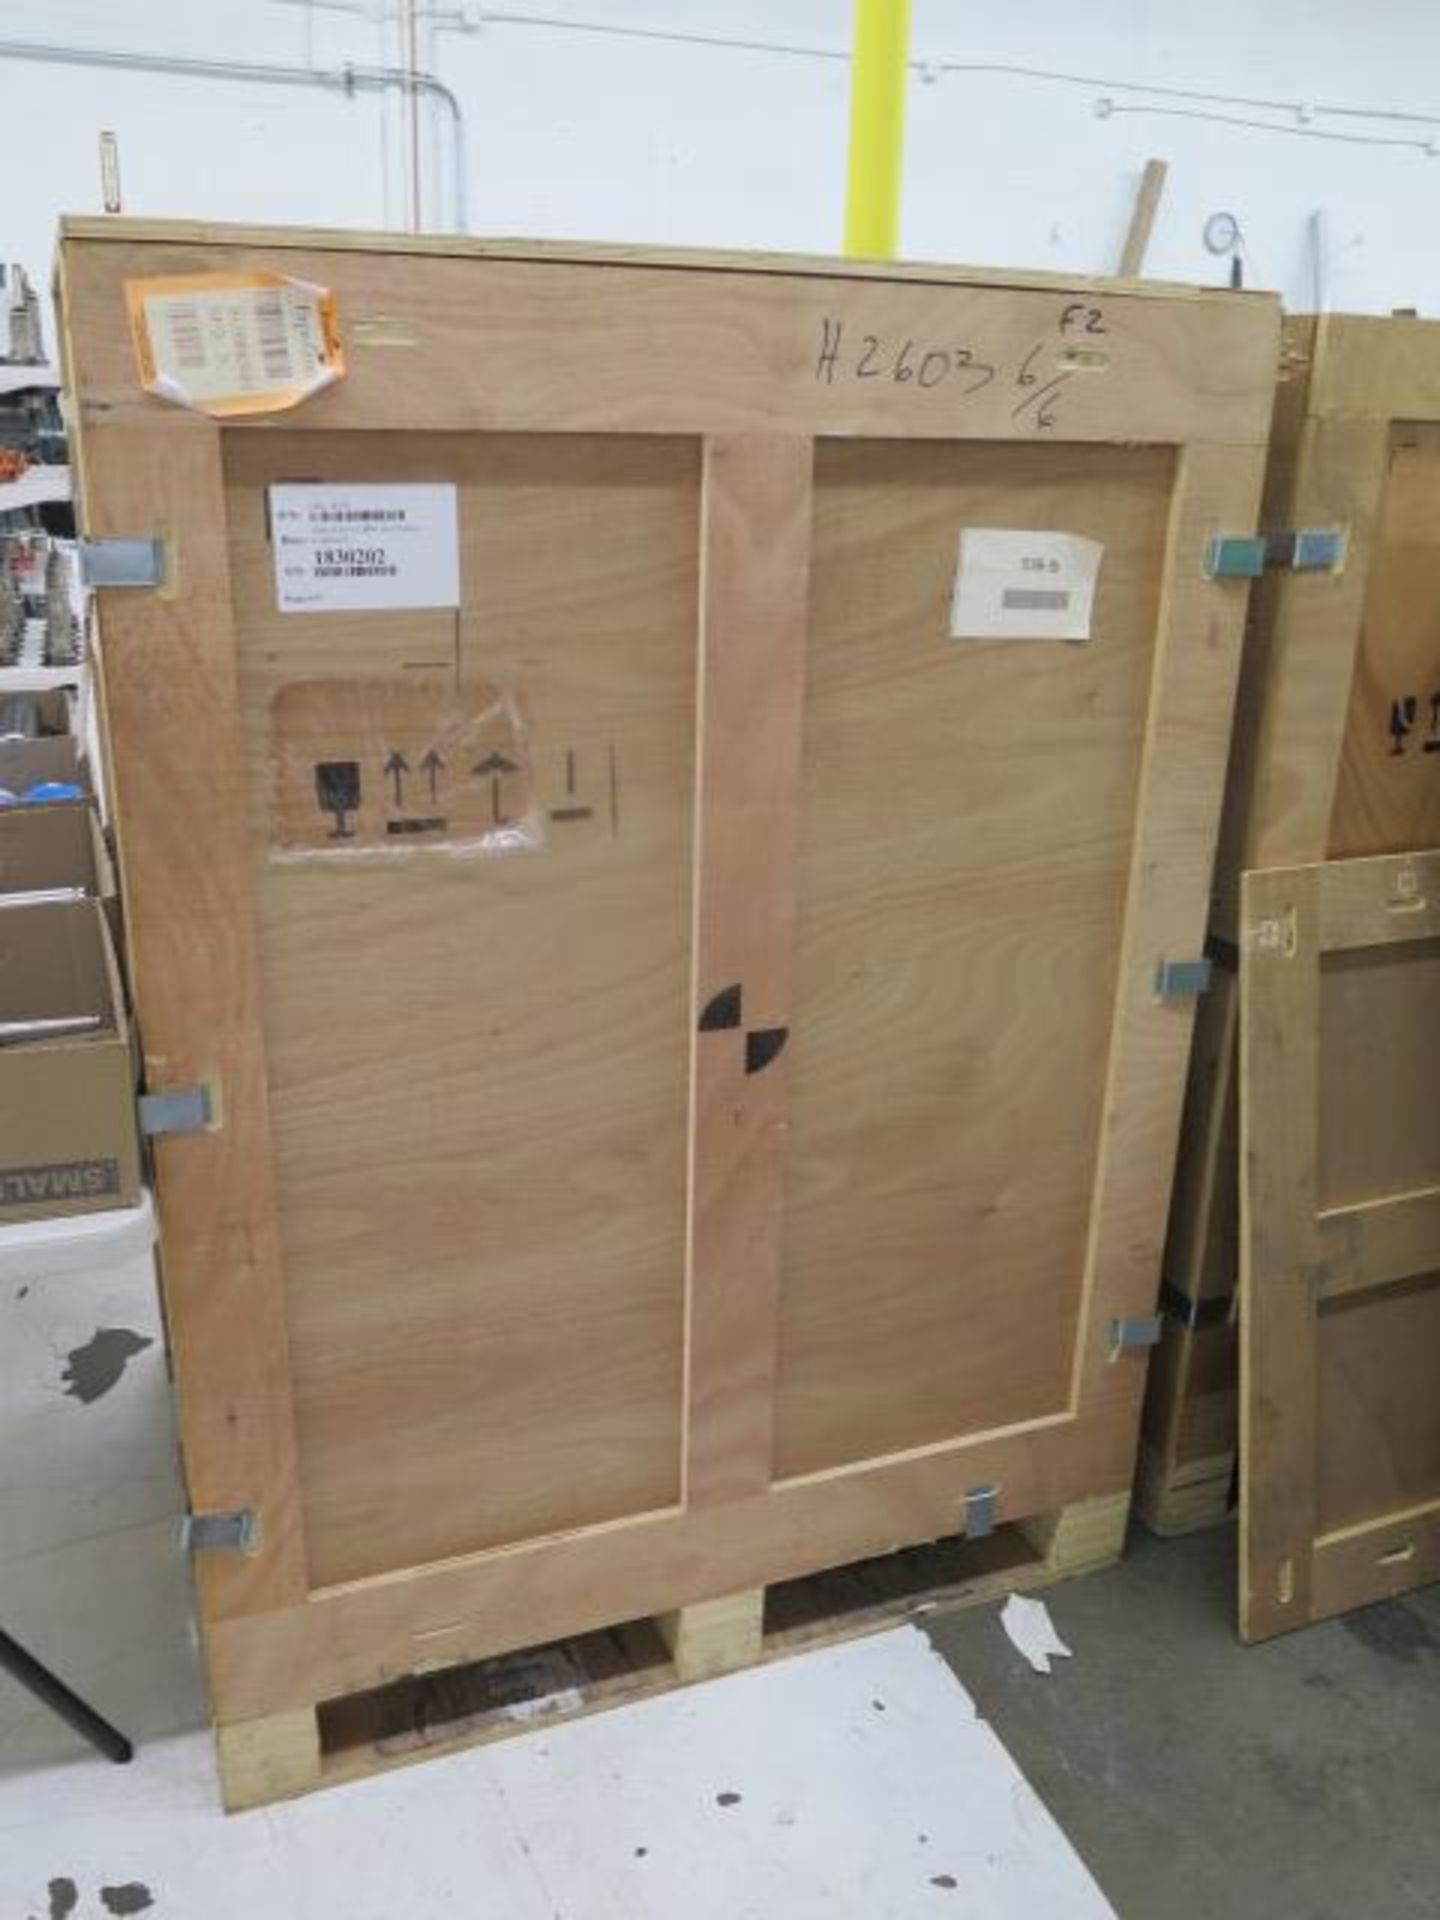 Stratasys OBJ18130 Duplex Material Cabinet s/n 183202 (NEW IN CRATE For J850 3D Printers) SOLD AS IS - Image 2 of 9